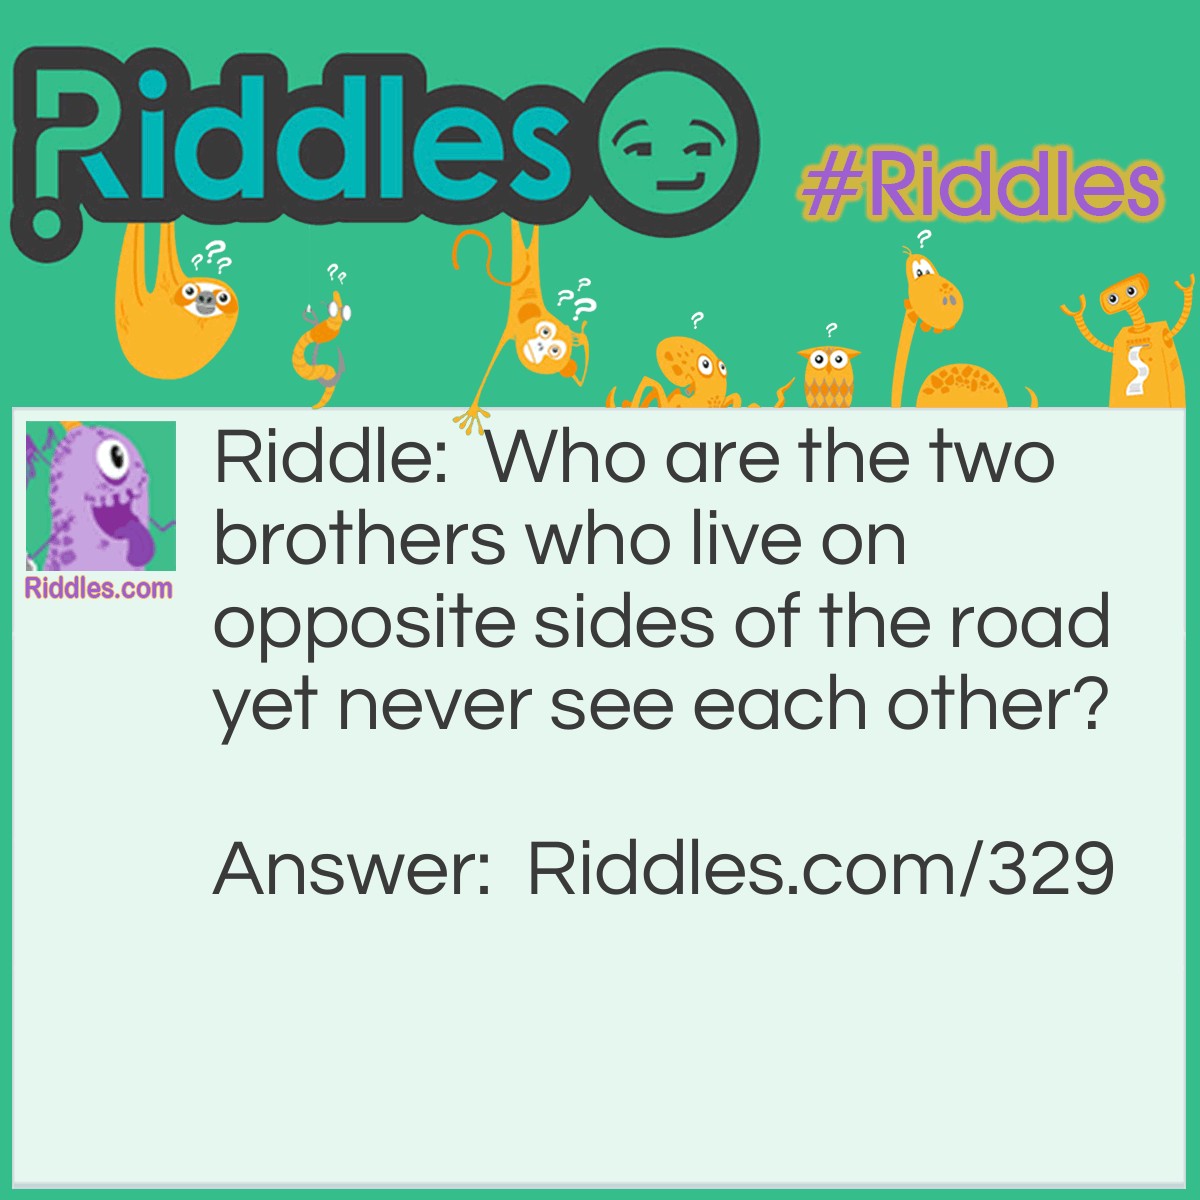 Riddle: Who are the two brothers who live on opposite sides of the road yet never see each other? Answer: A person's eyes, the nose is the road.